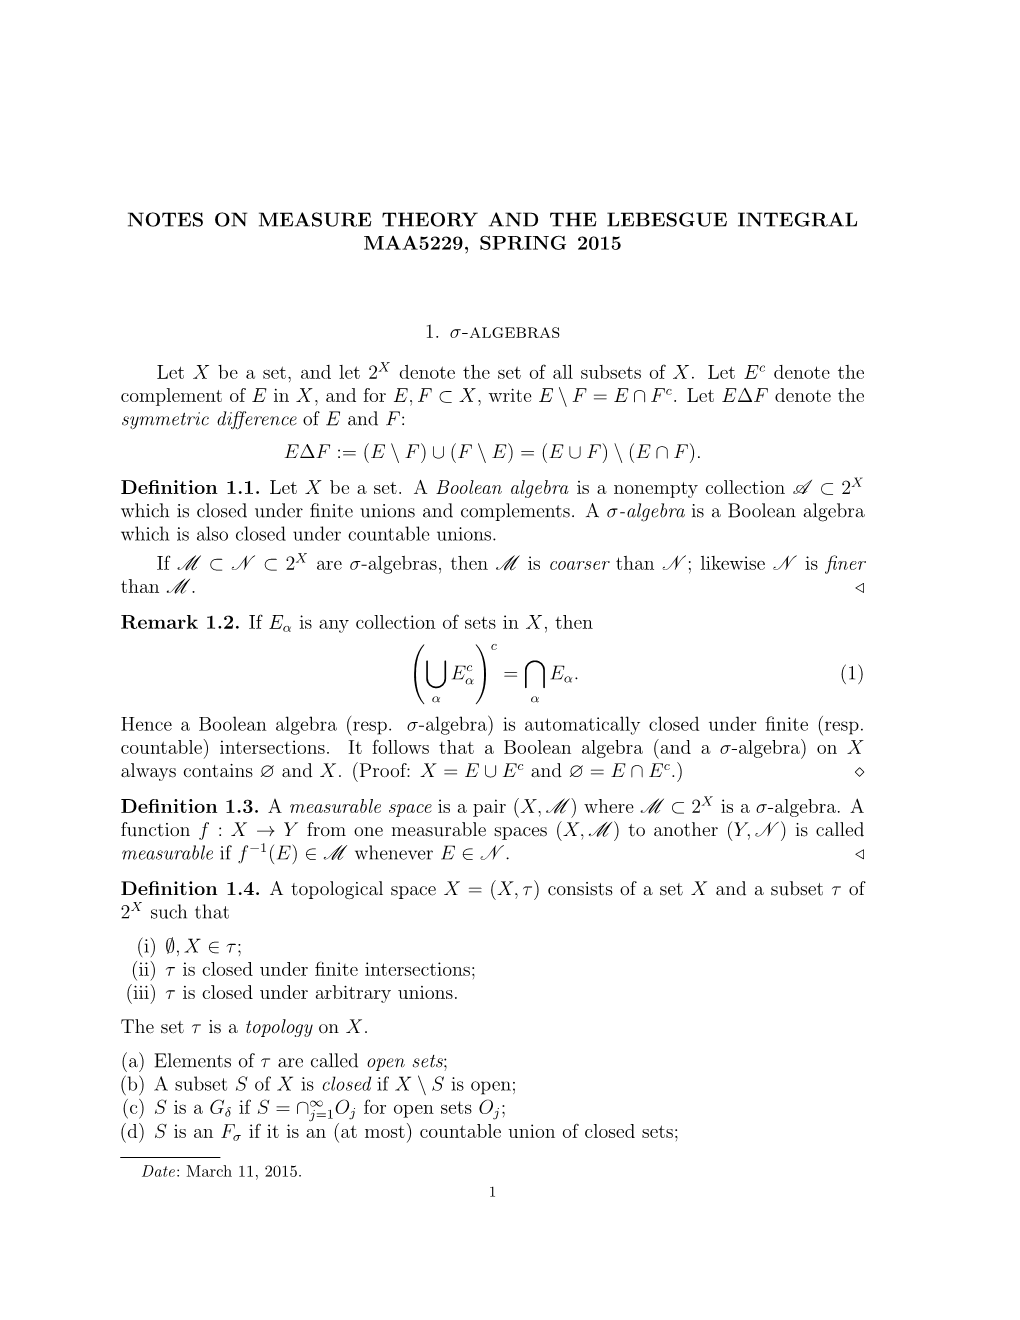 NOTES on MEASURE THEORY and the LEBESGUE INTEGRAL MAA5229, SPRING 2015 1. Σ-Algebras Let X Be a Set, and Let 2 X Denote The